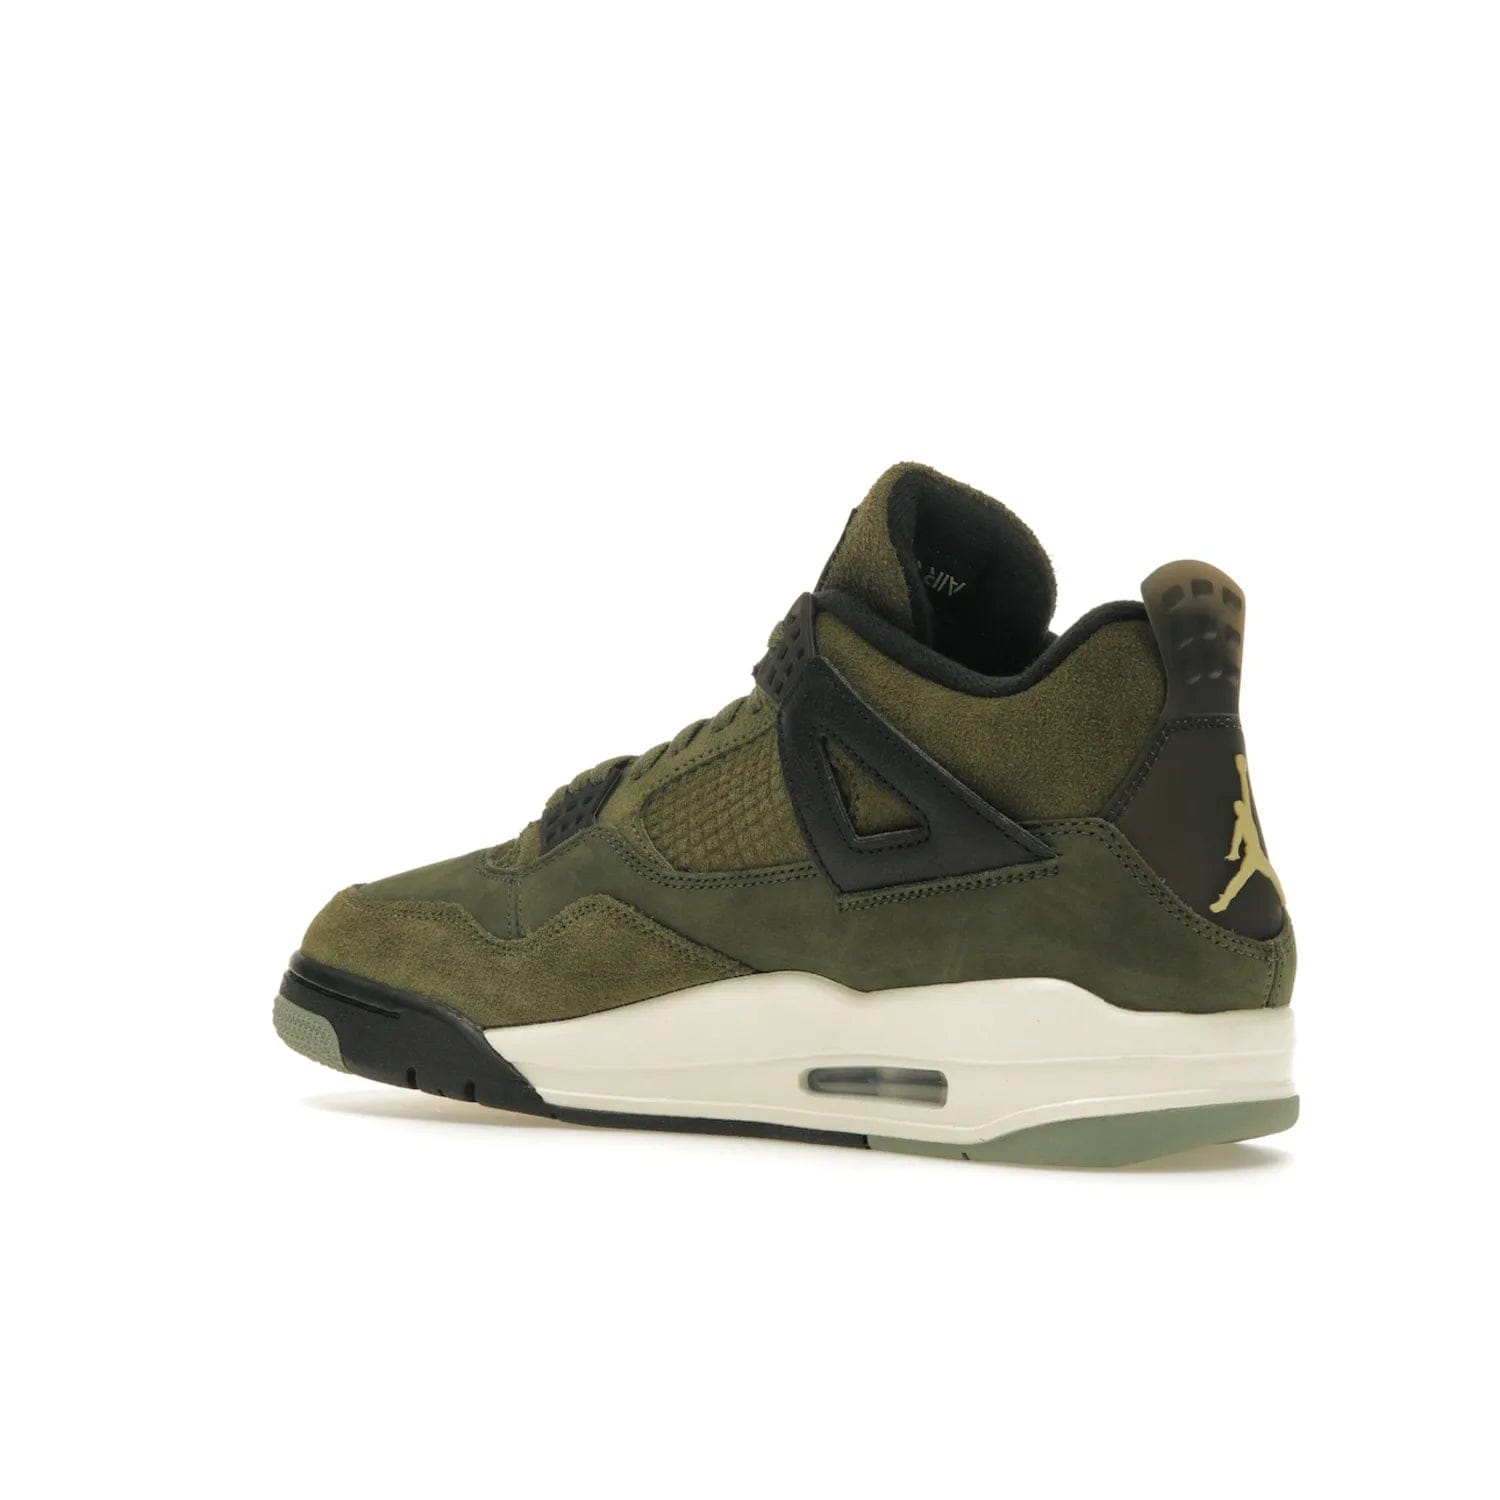 Jordan 4 Retro SE Craft Medium Olive - Image 23 - Only at www.BallersClubKickz.com - Grab the Jordan 4 Retro SE Crafts for a unique style. Combines Medium Olive, Pale Vanilla, Khaki, Black and Sail, with same classic shape, cushioning, and rubber outsole. Available on November 18th!